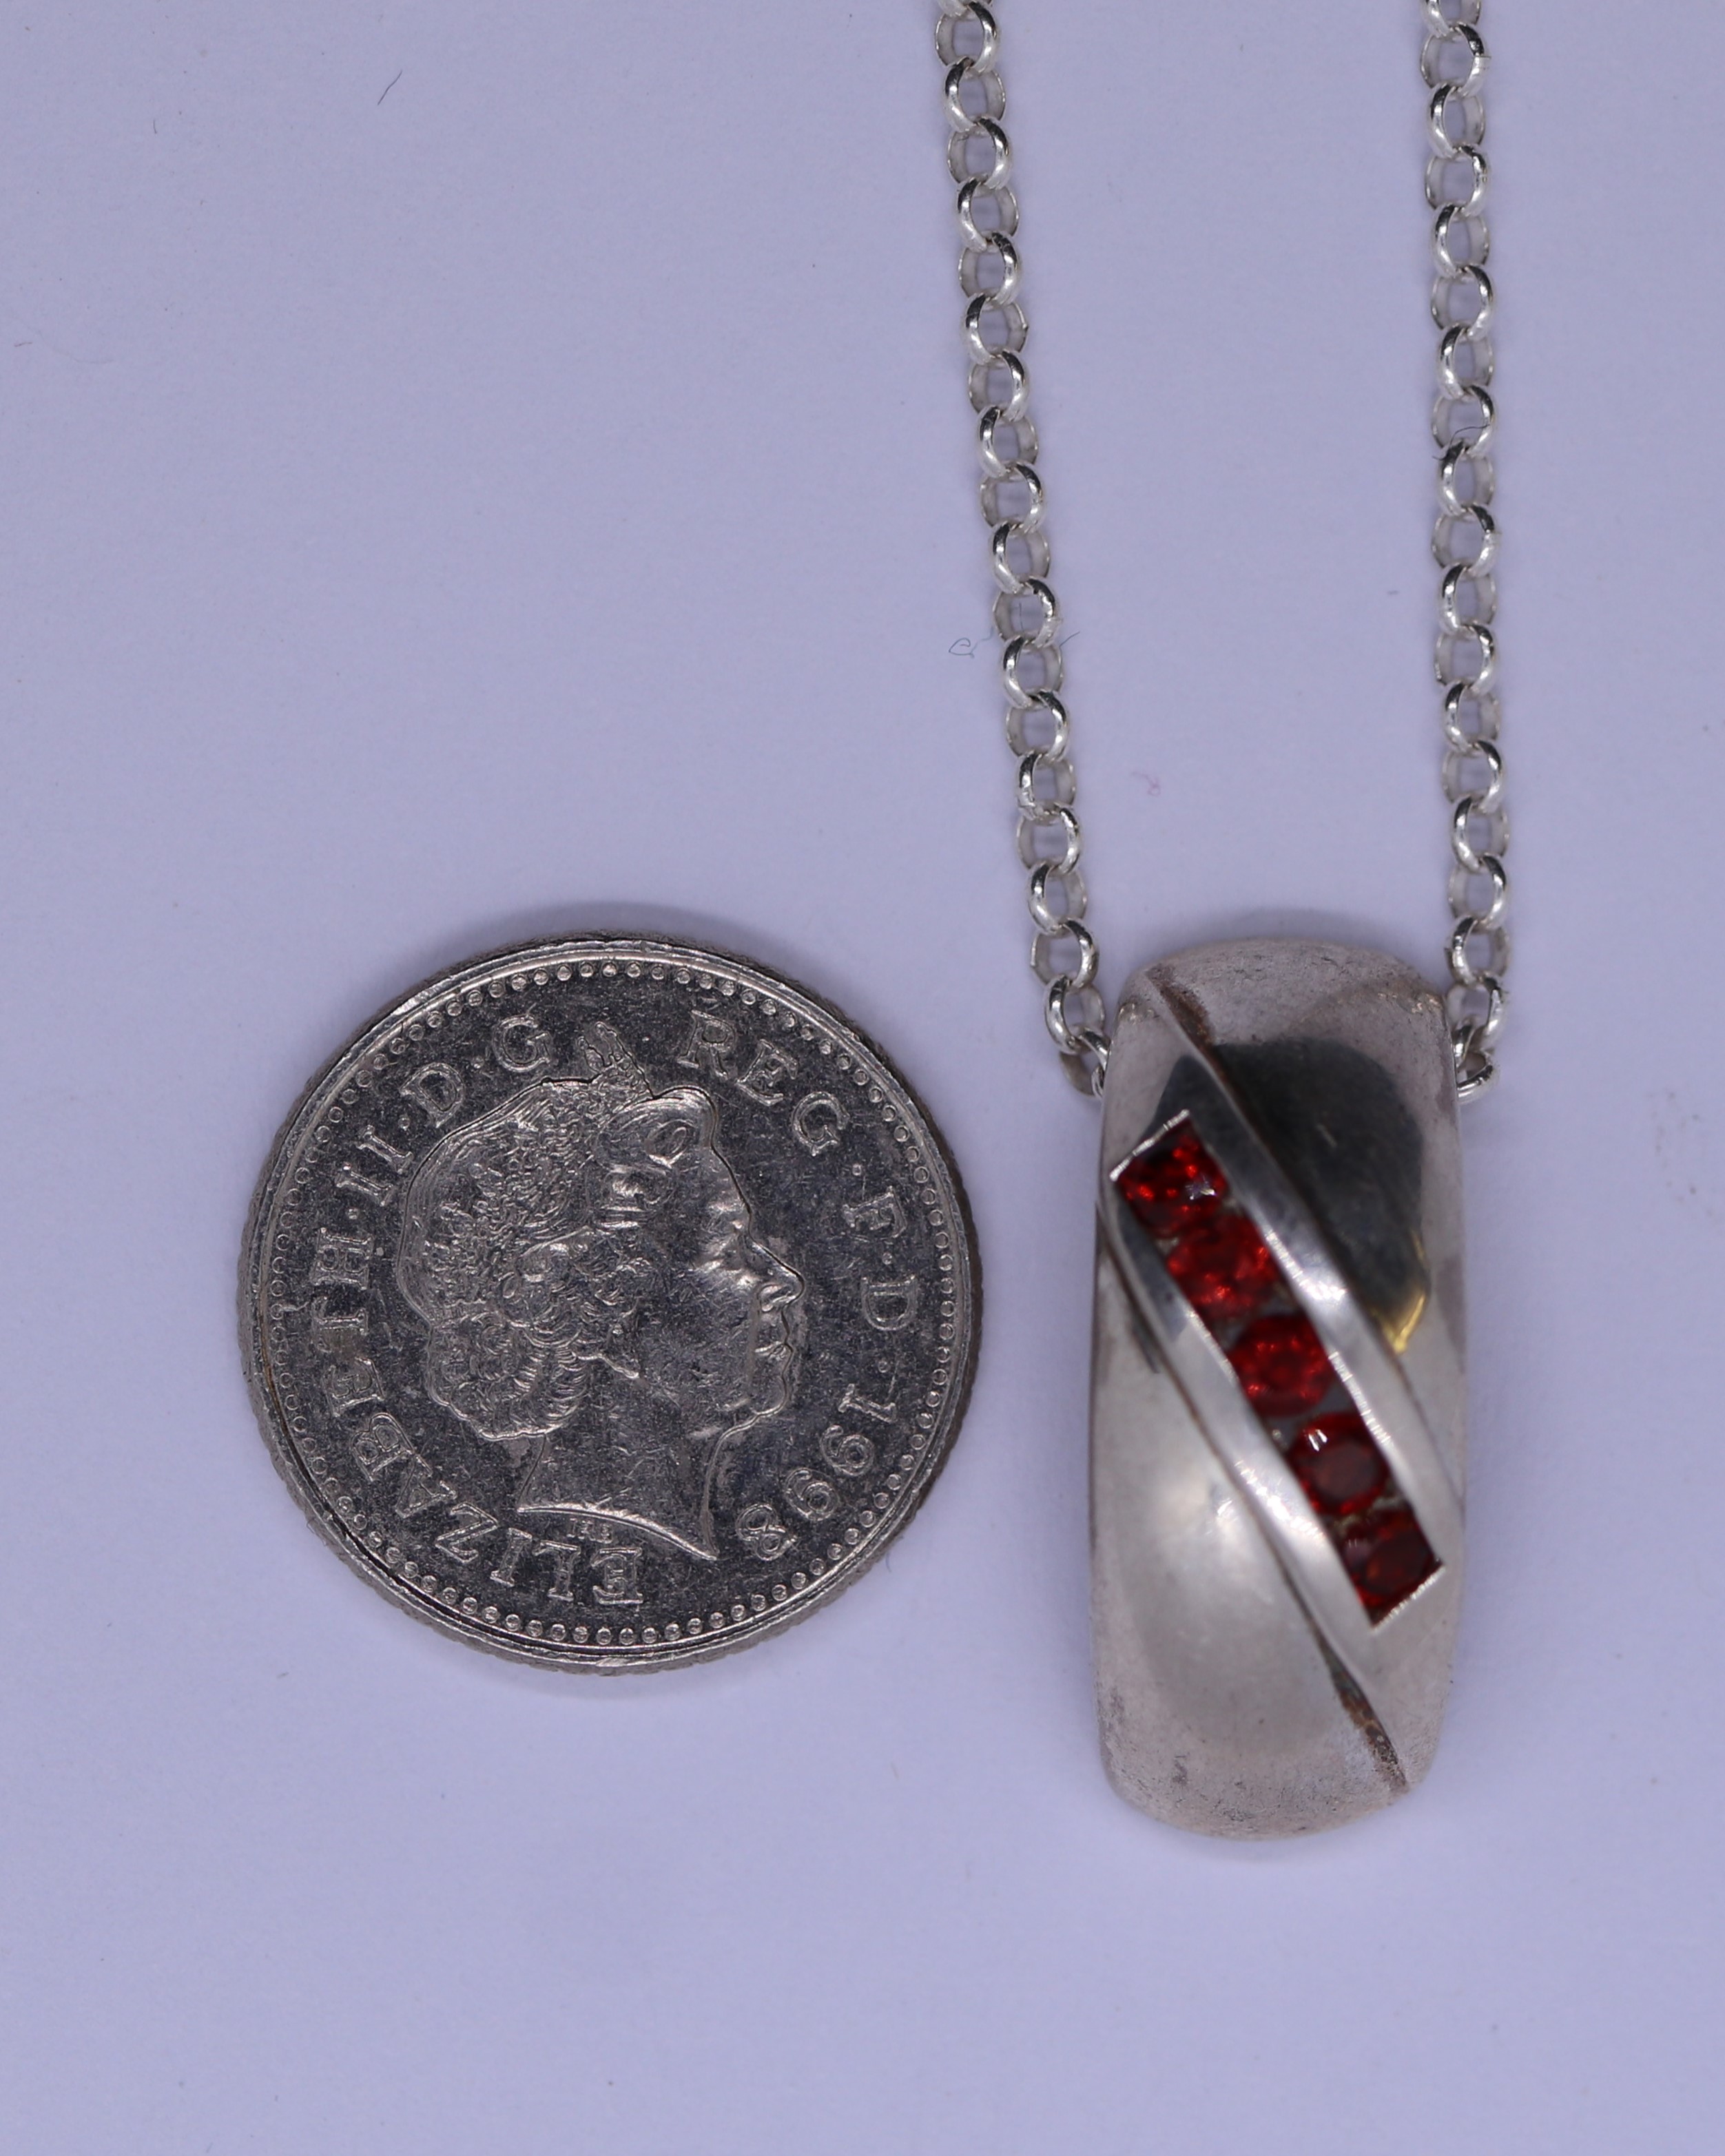 Silver garnet set pendent on chain - Image 2 of 2